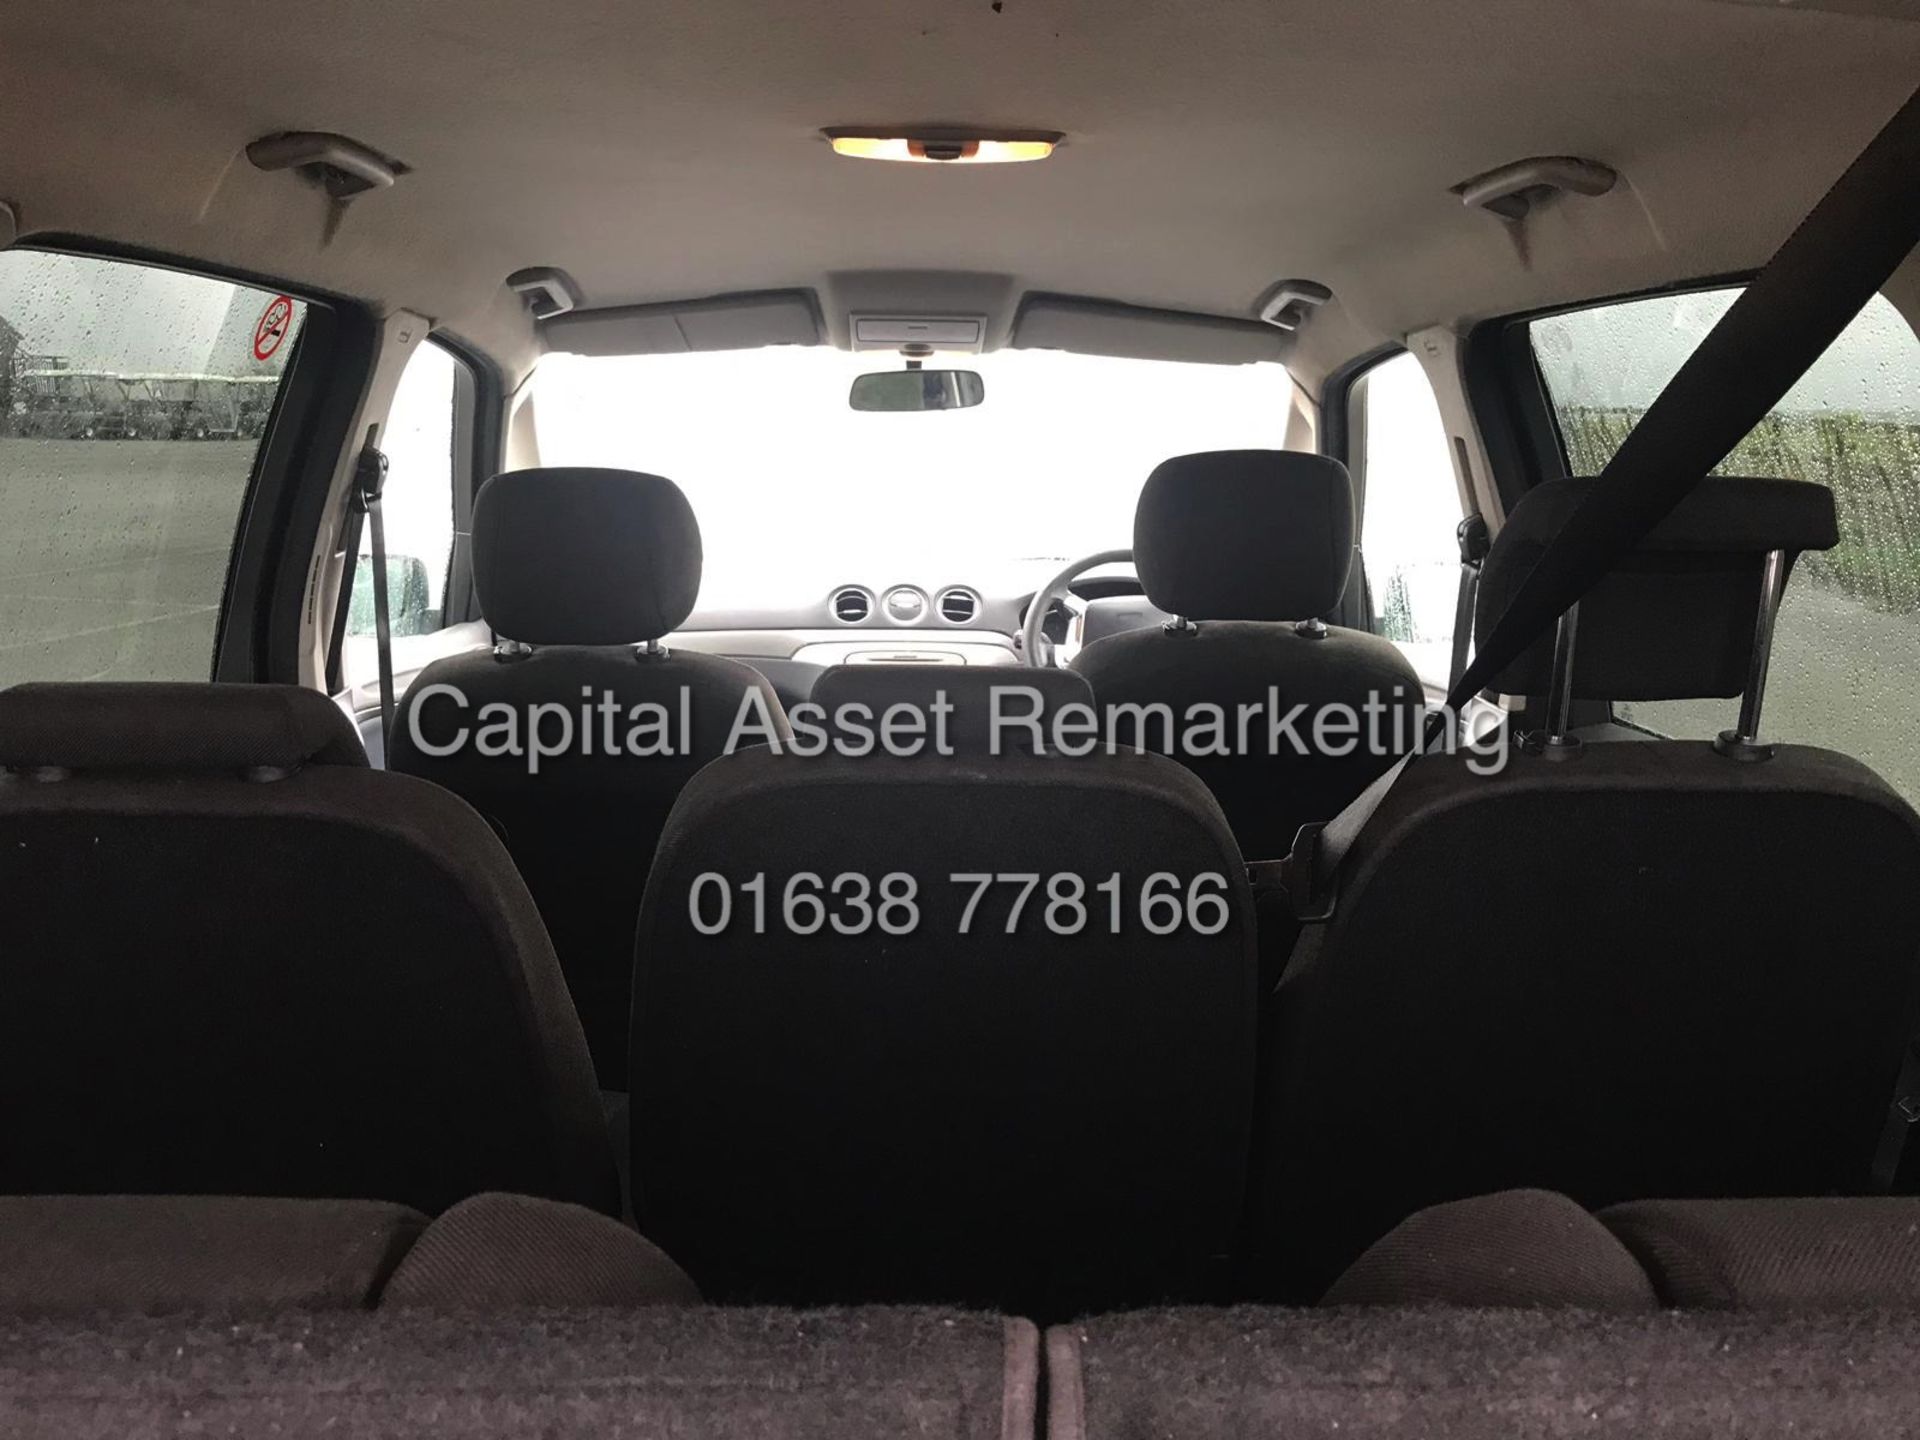 (ON SALE) FORD GALAXY 2.0TDCI "EDGE" 7 SEATER - 08 REG - AIR CON - 1 PREVIOUS OWNER - BLACK - Image 12 of 14